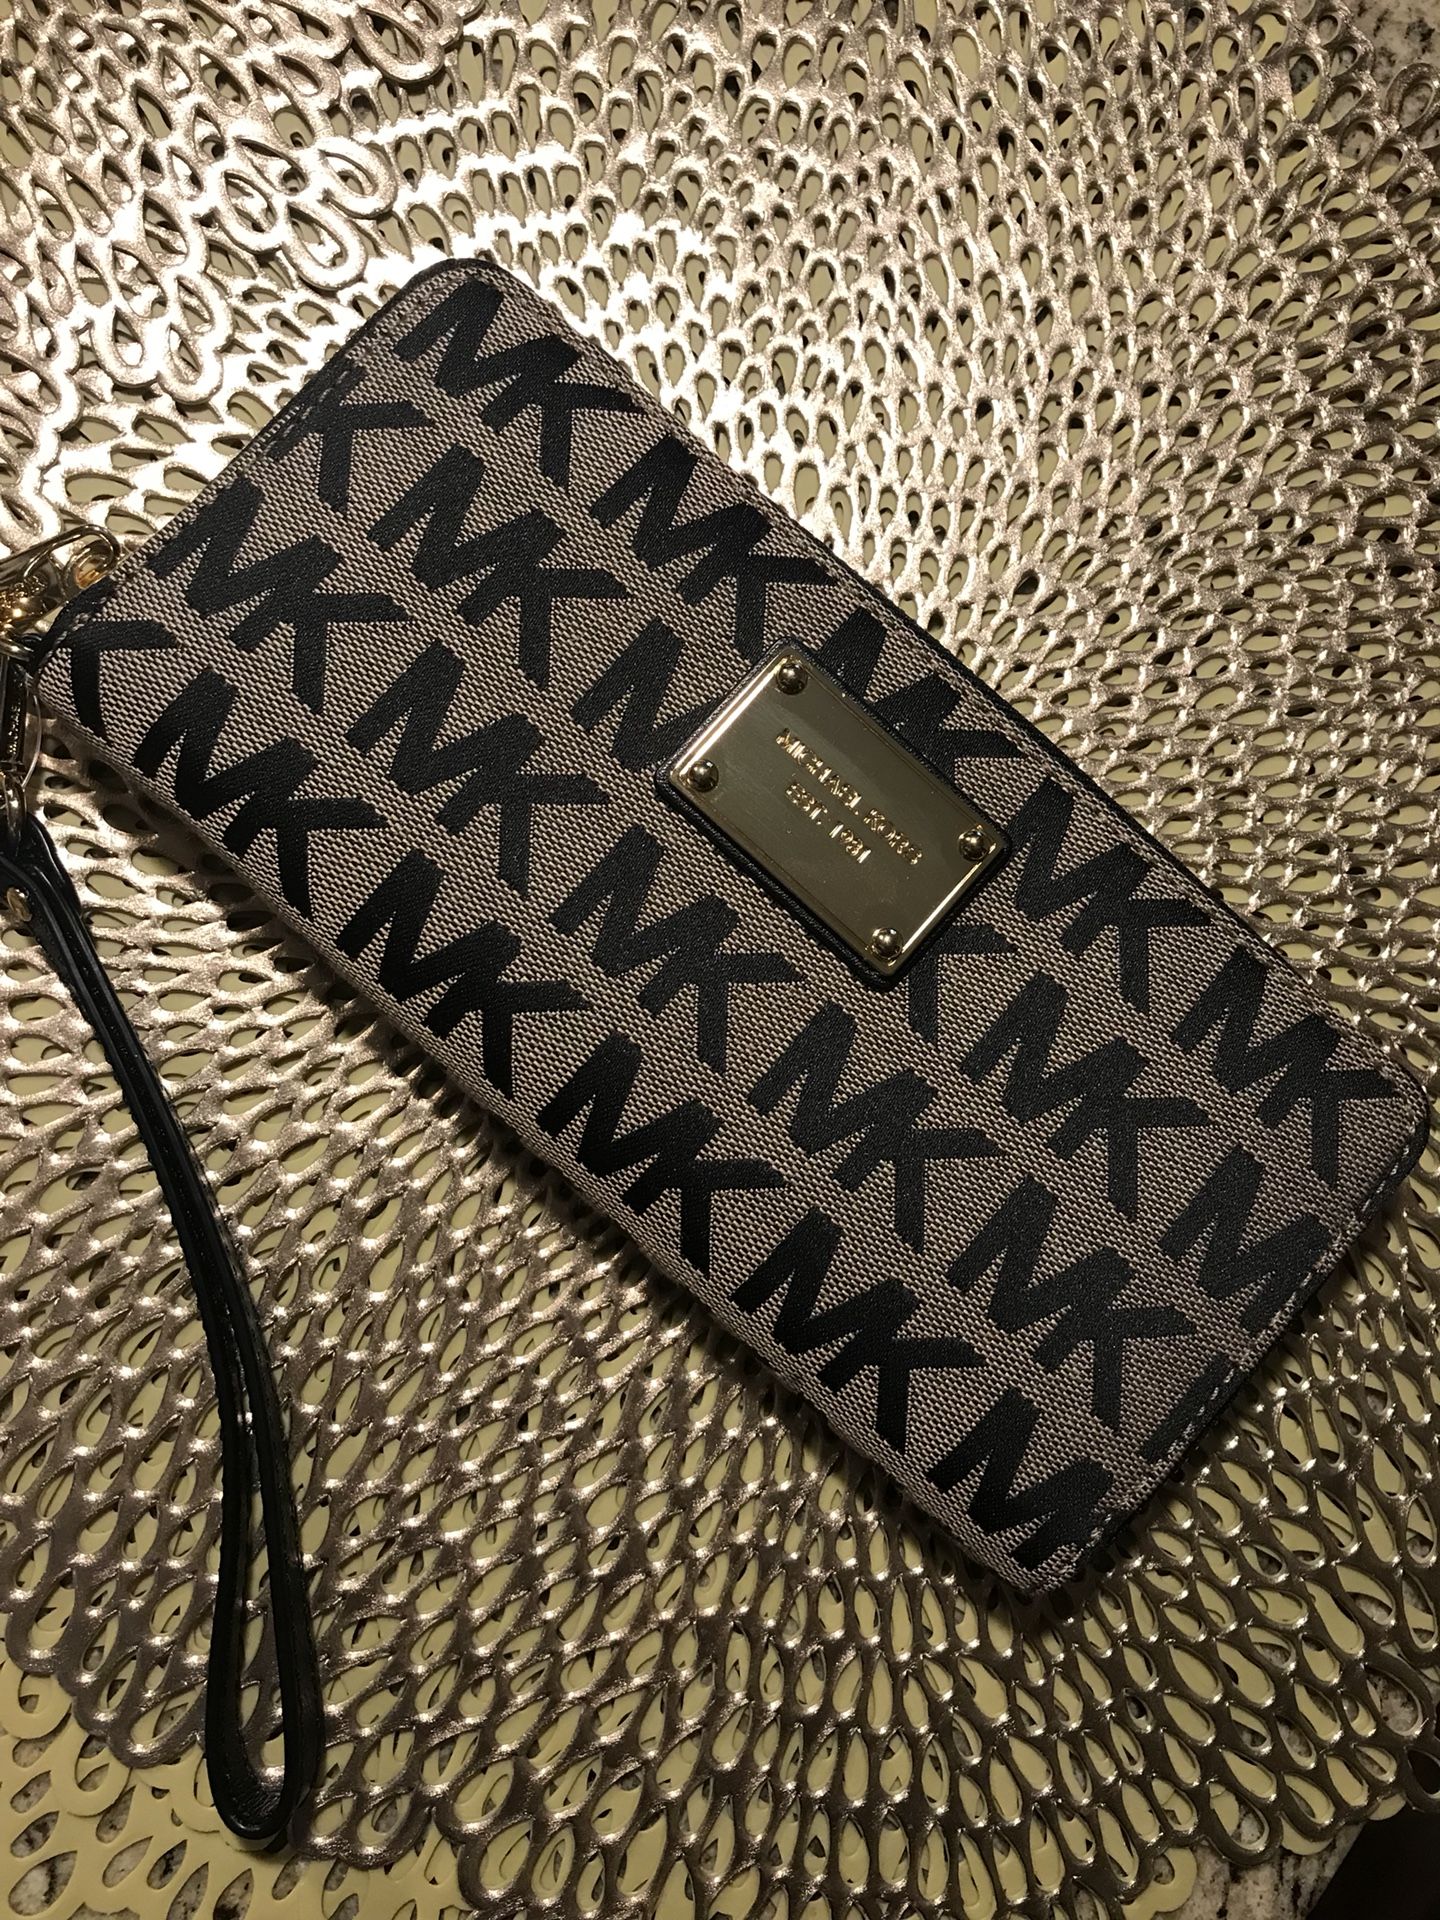 Mk wallet brand new never used